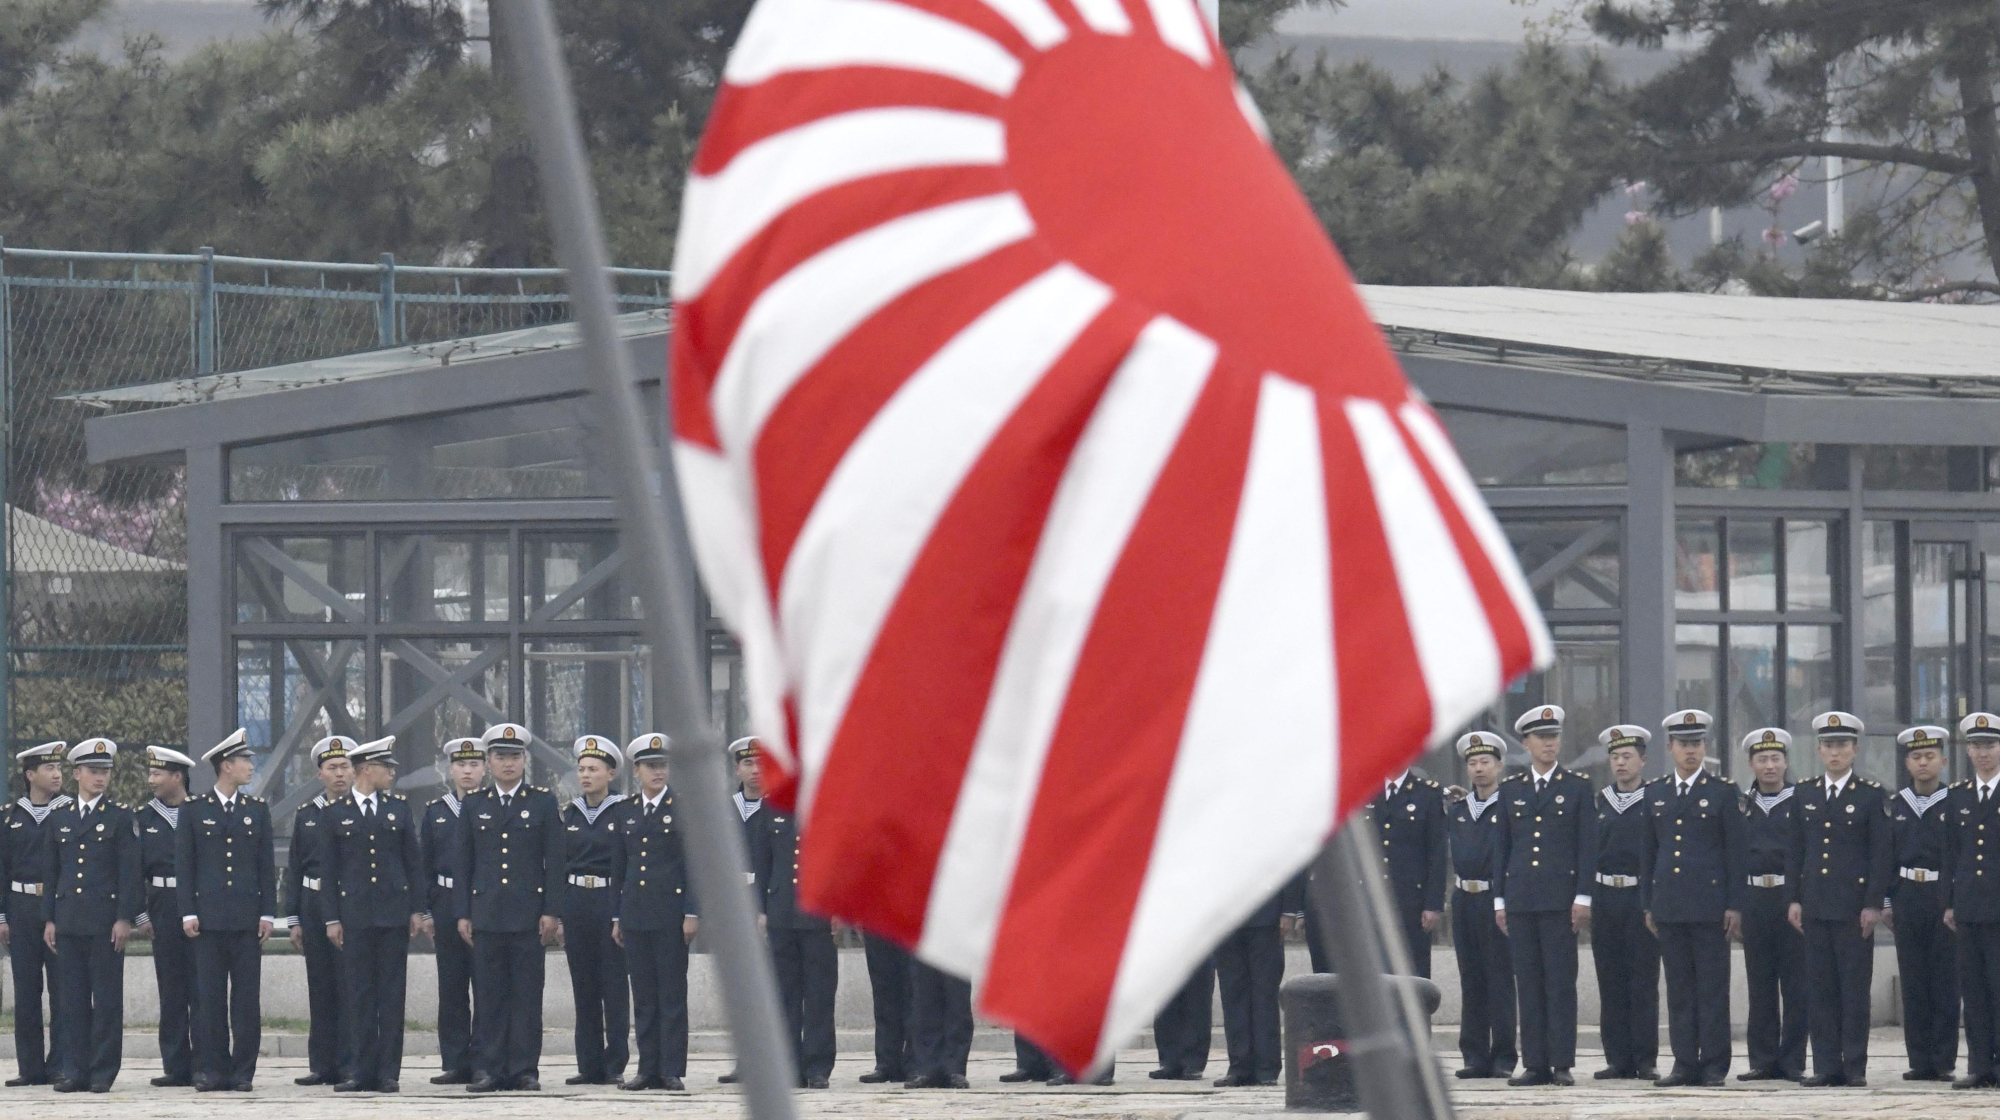 EXPLAINER: Why Japan 'rising sun' flag provokes Olympic ire